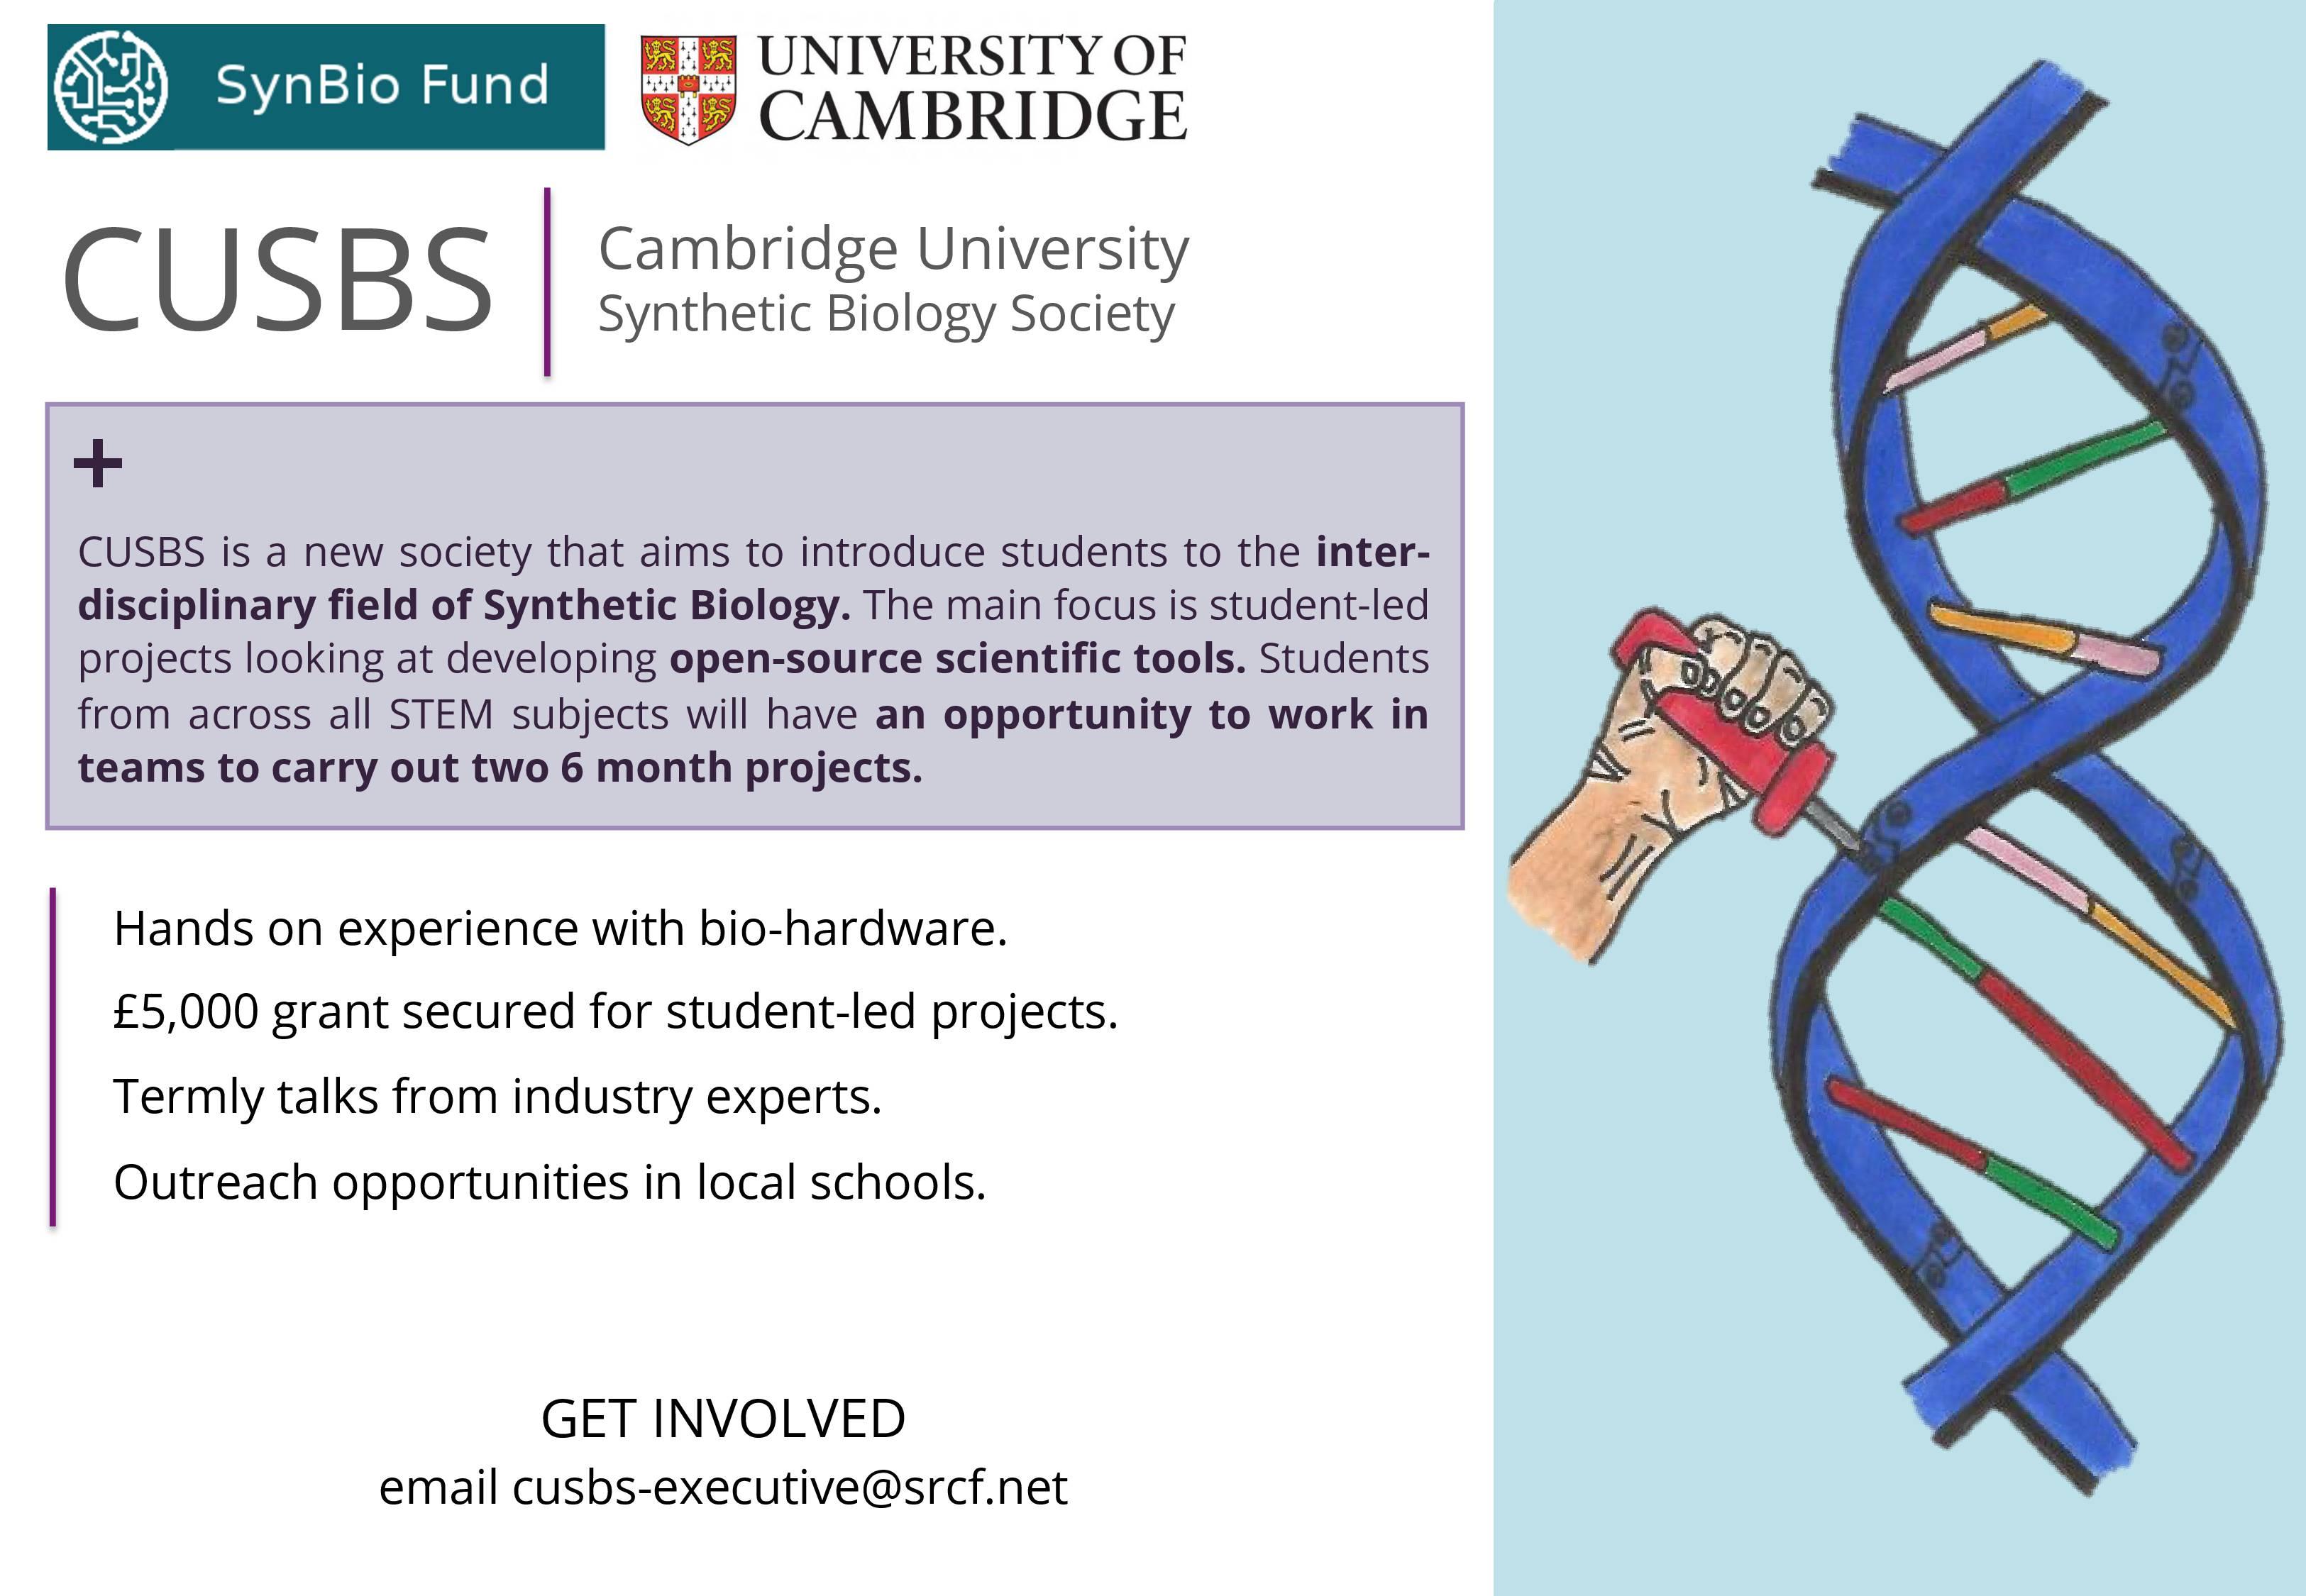 Cambridge University Synthetic Biology Society Launches